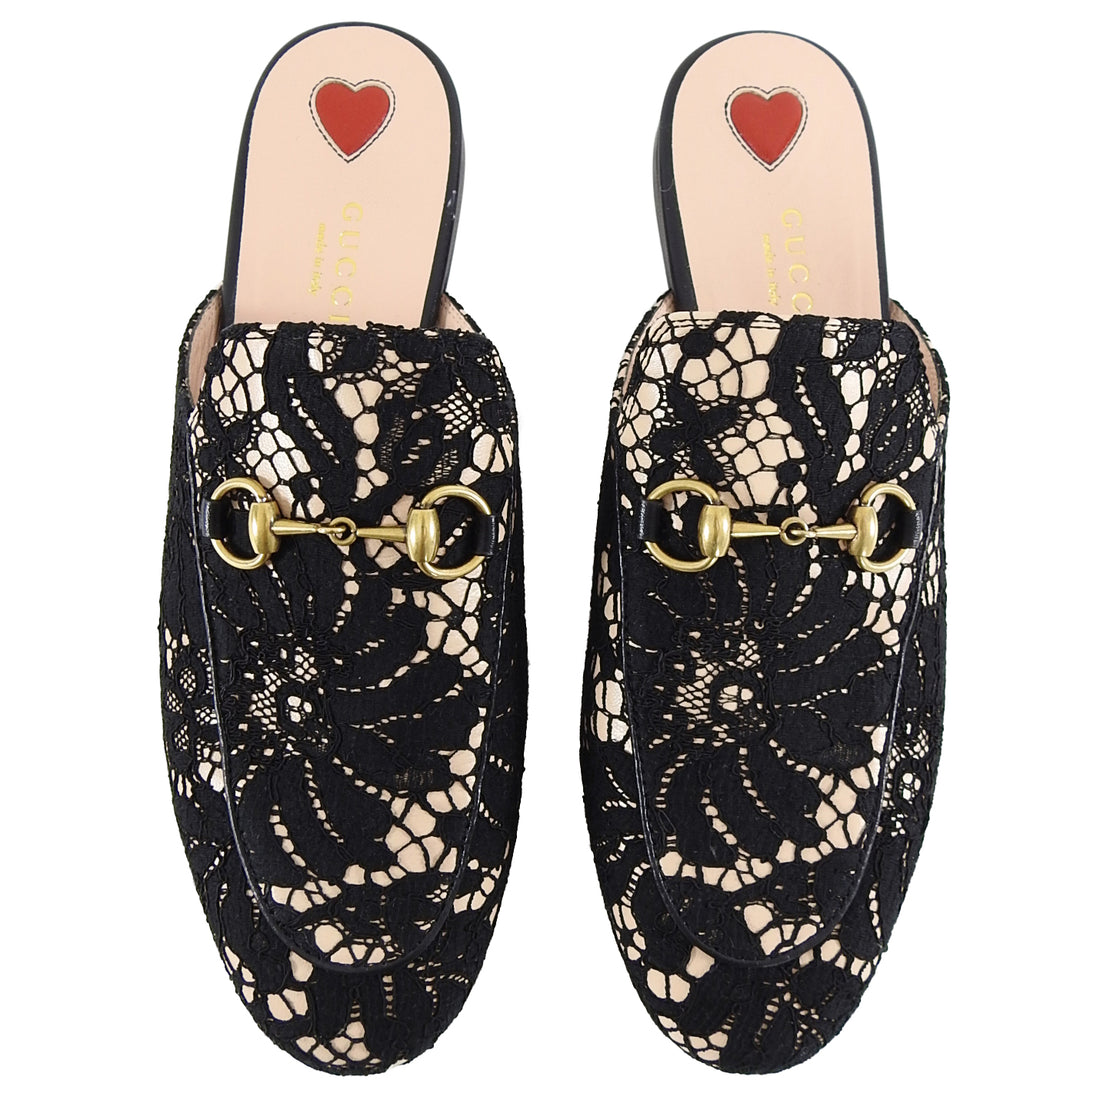 Gucci Black Lace and Horsebit Princetown Slipper Shoes - 6.5